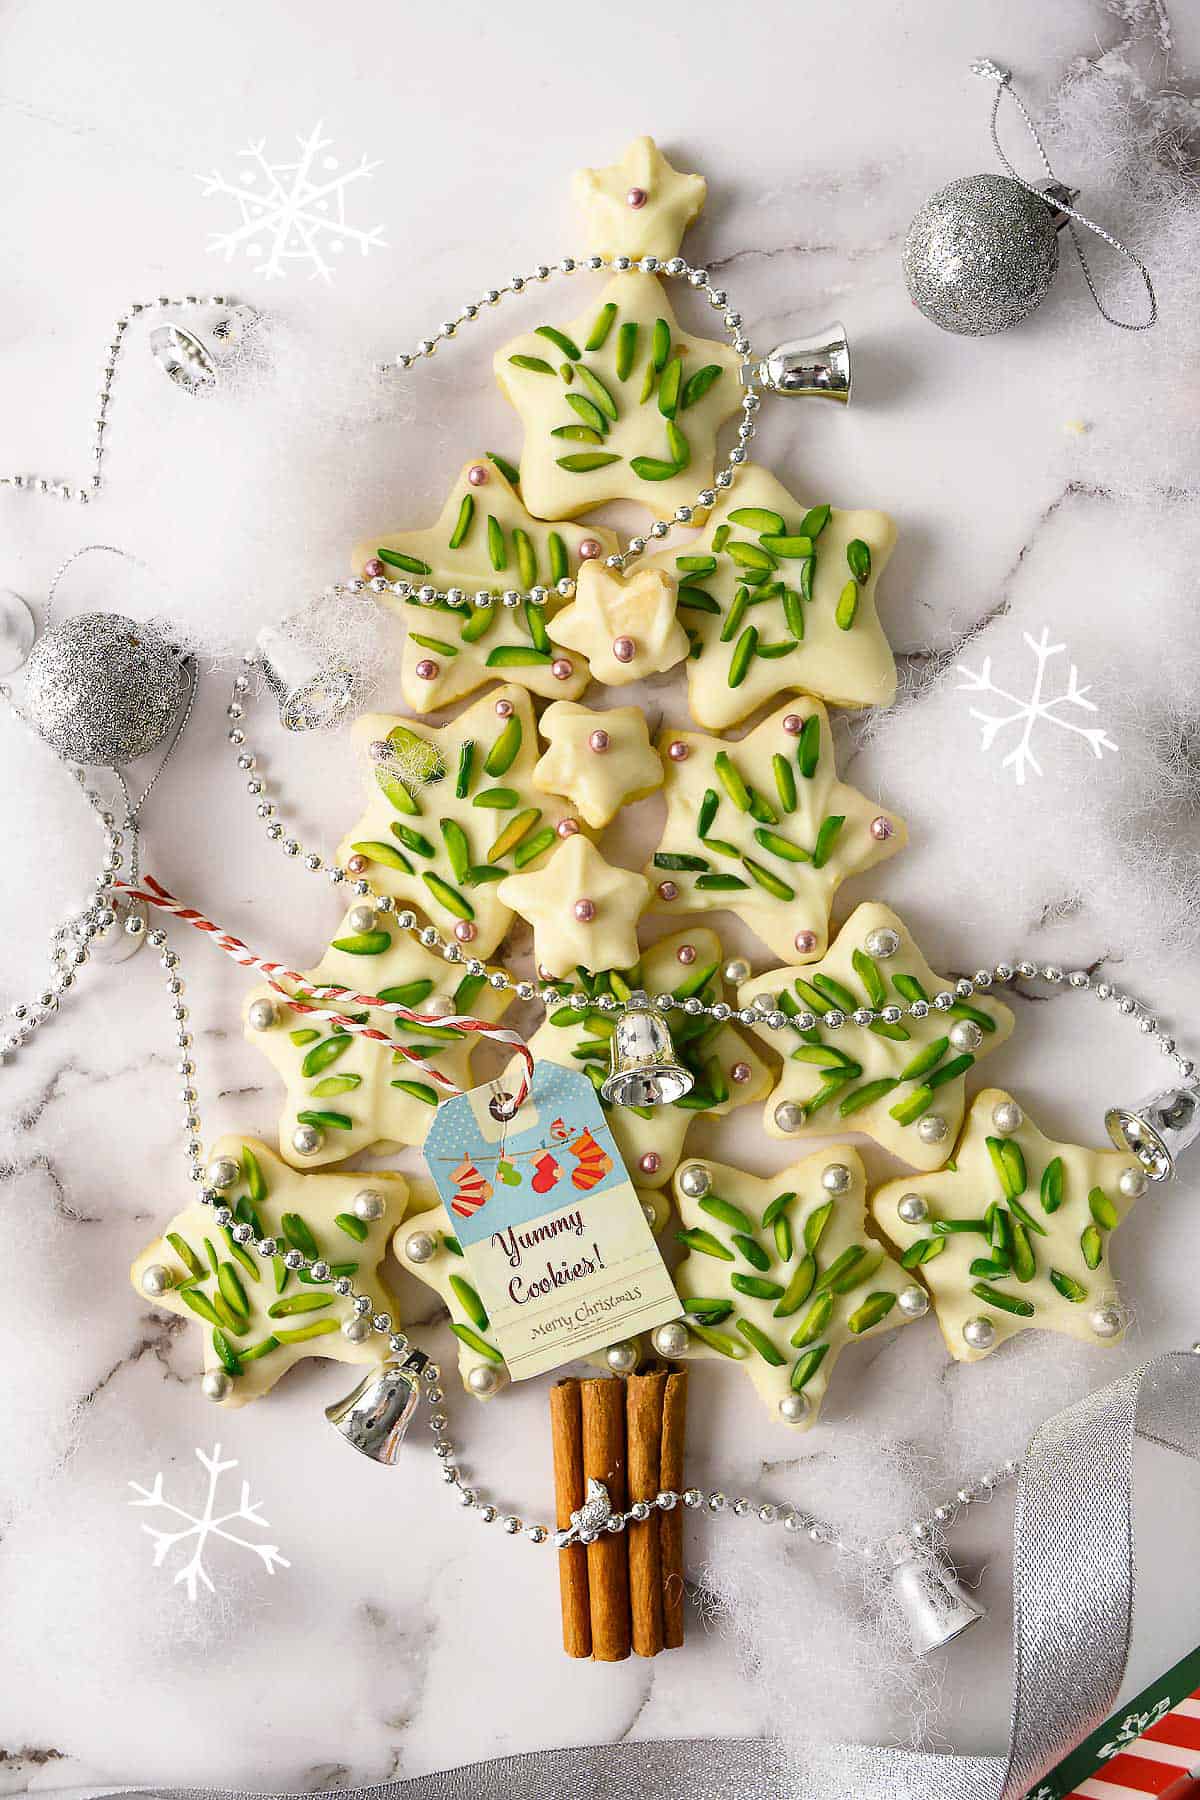 Christmas star cookies arranged in the shape of a Christmas tree.